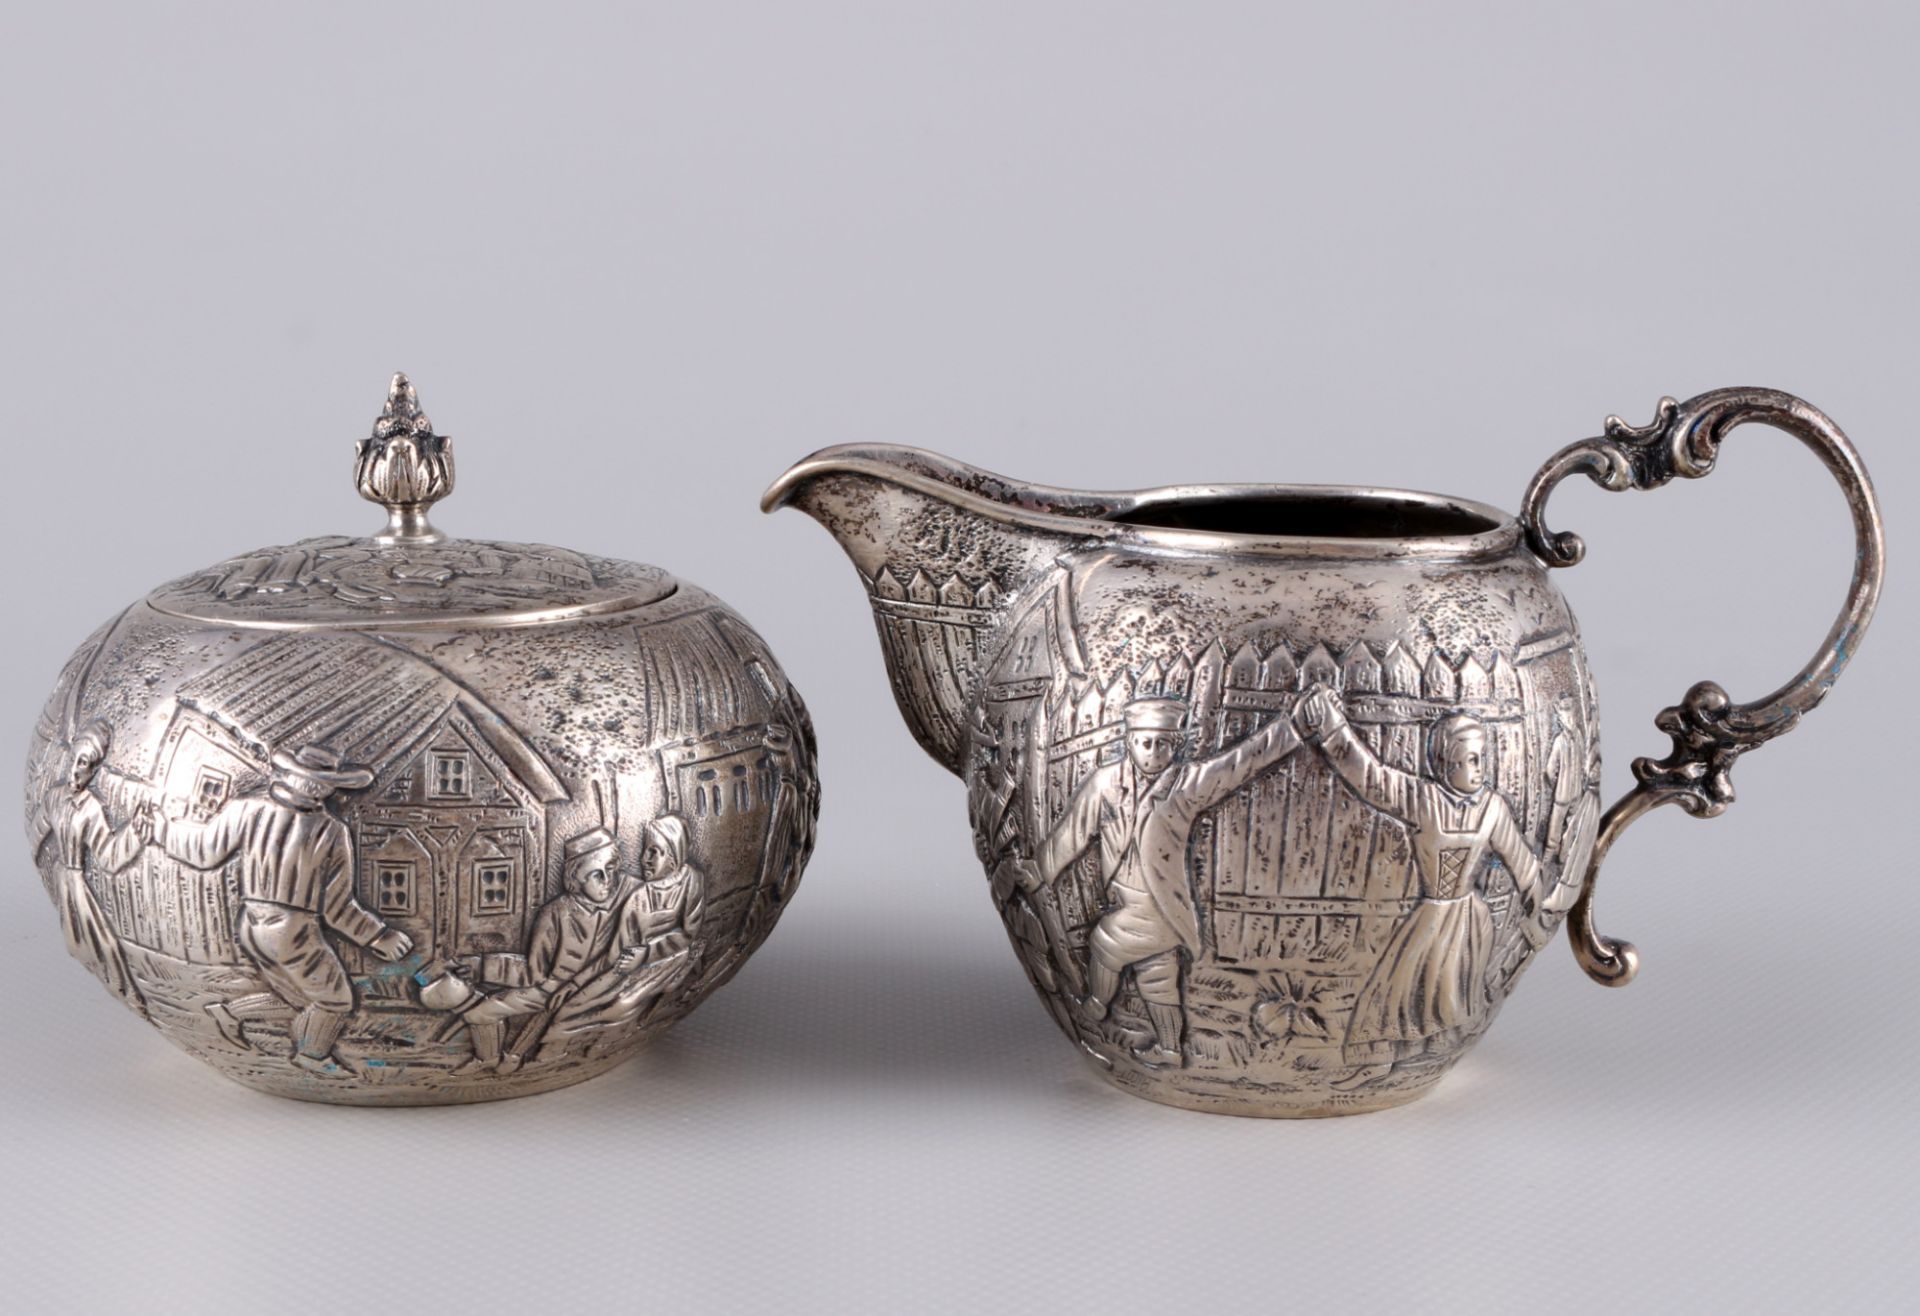 Ludwig Neresheimer 800 silver coffee set with dancing scenery, Silber Kaffeekern mit Tanzszenerie, - Image 3 of 5